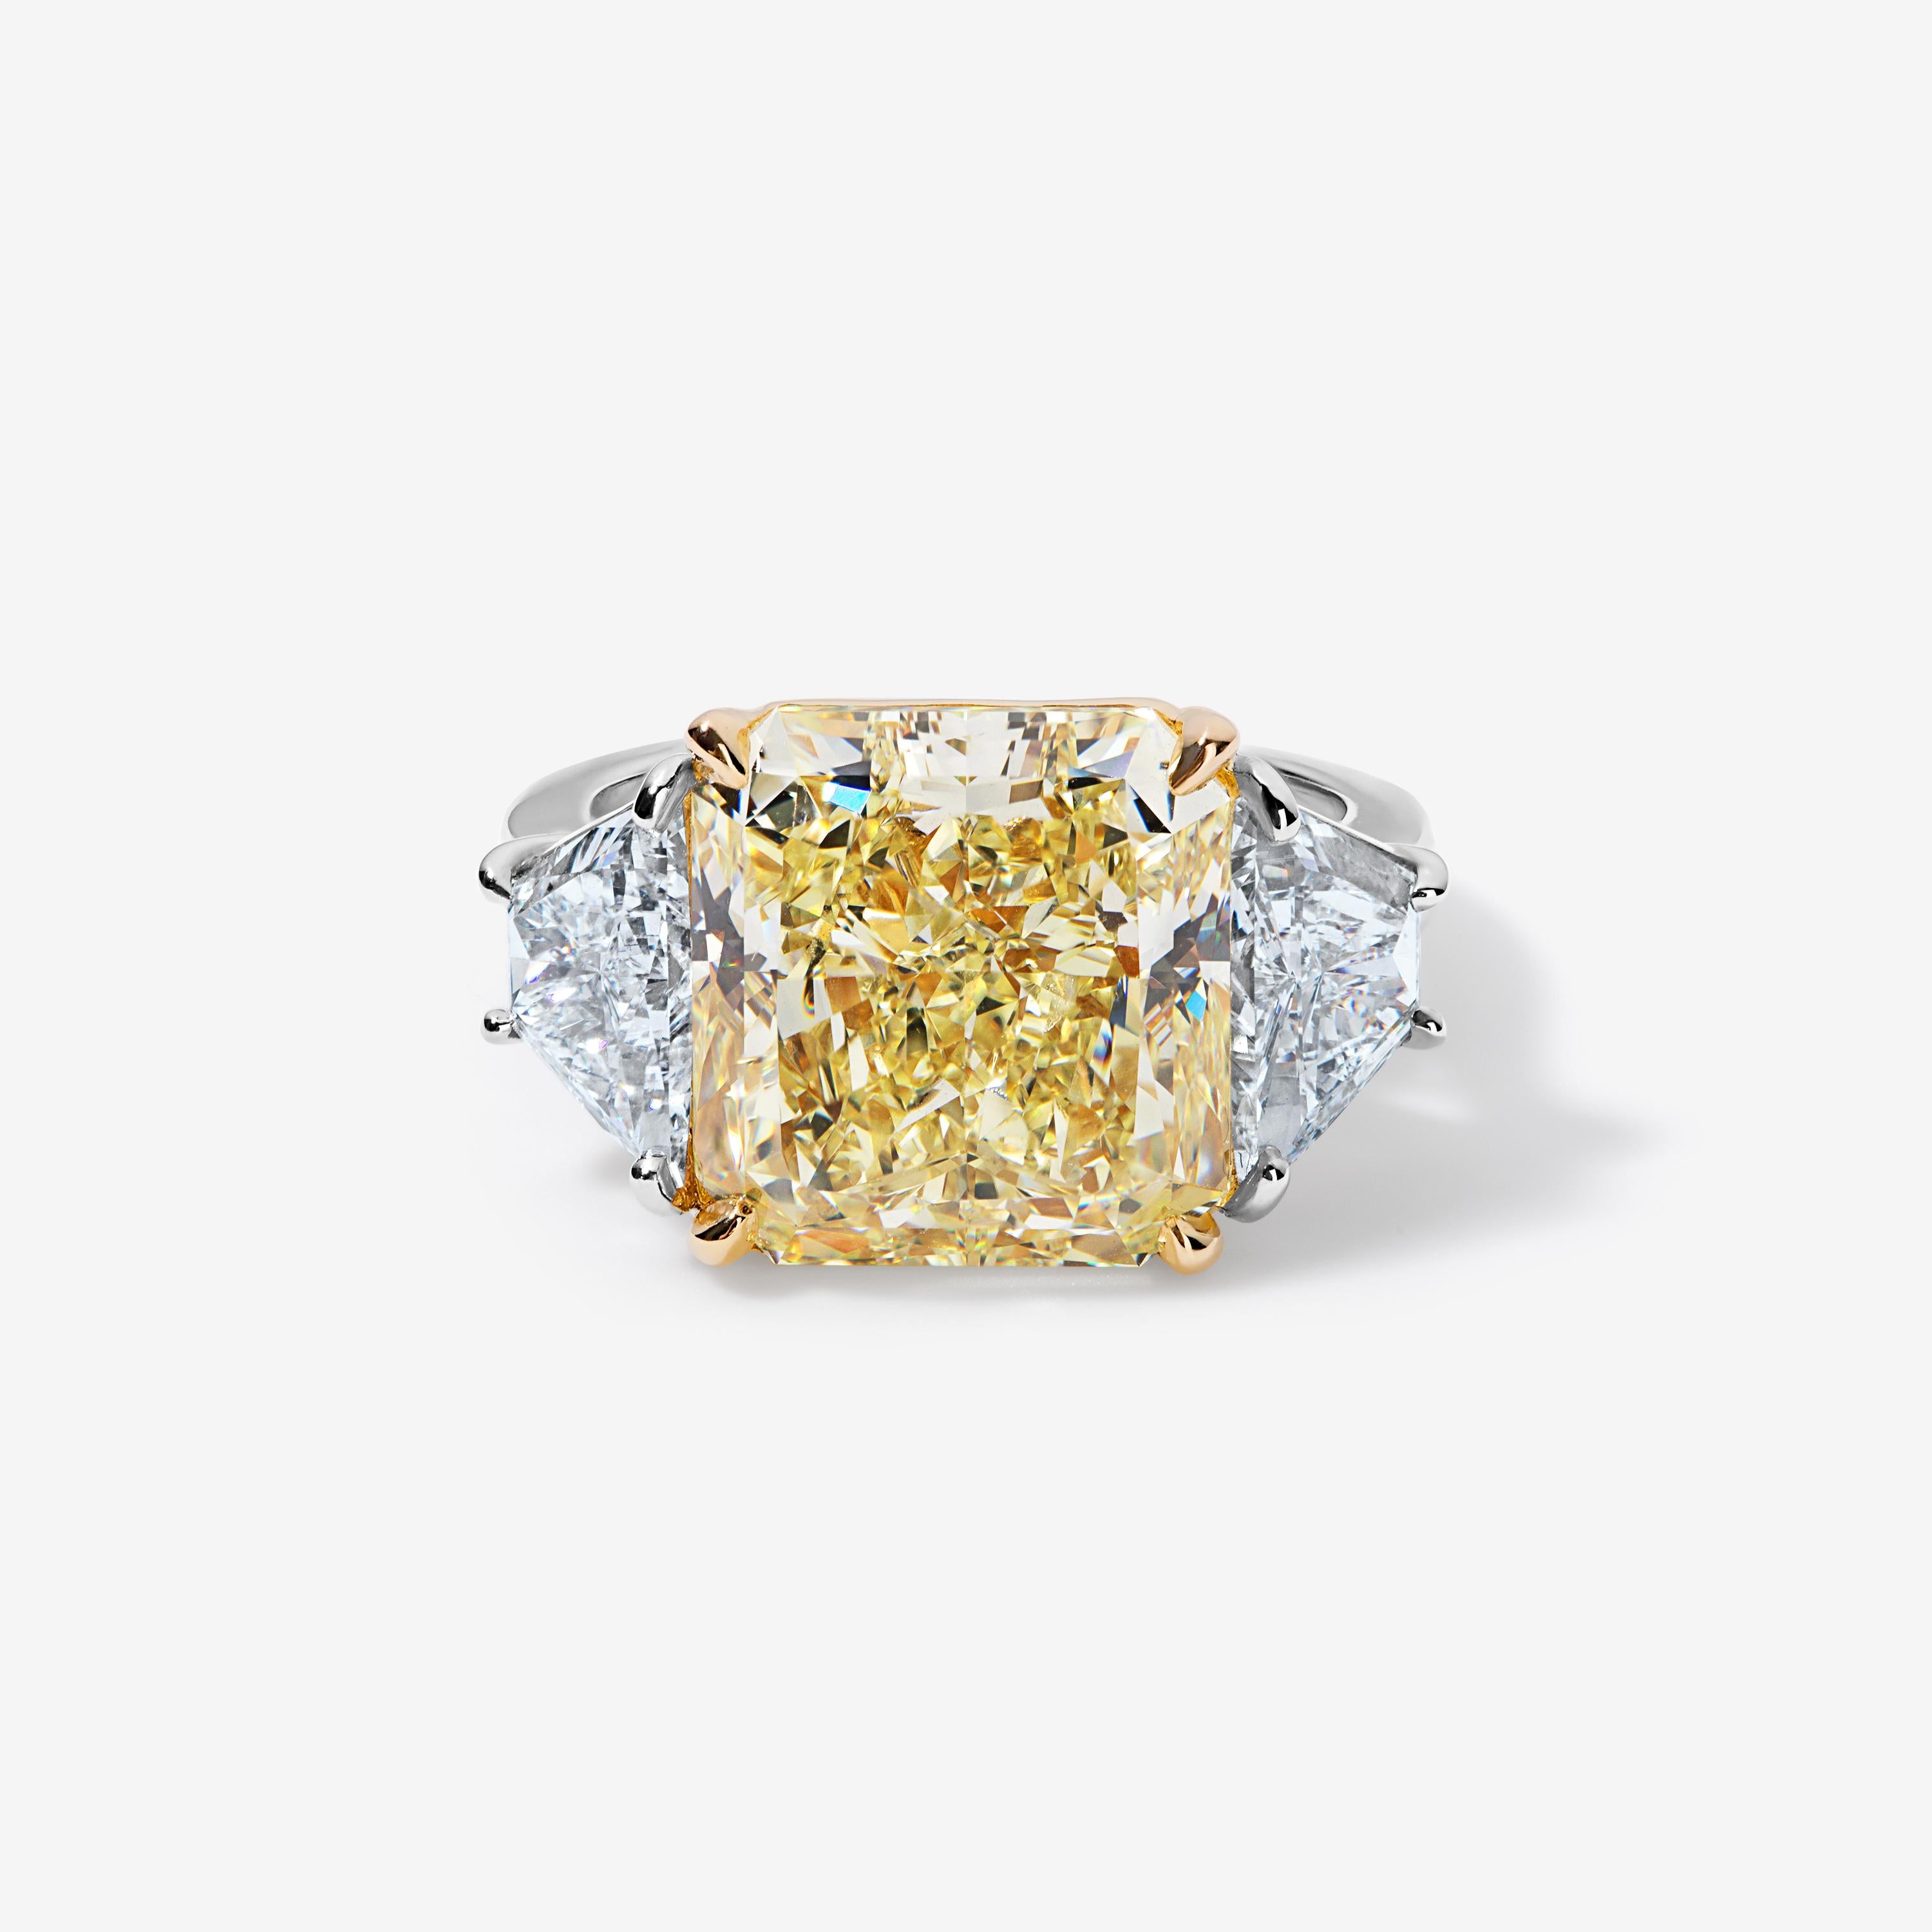 For the woman who wants to wear the sun on her finger.

This 10 carat fancy yellow radiant cut diamond is nestled between two trapezoid white diamonds. It shows strong evenly saturated color, is eye clean, and shows more size than other stones of